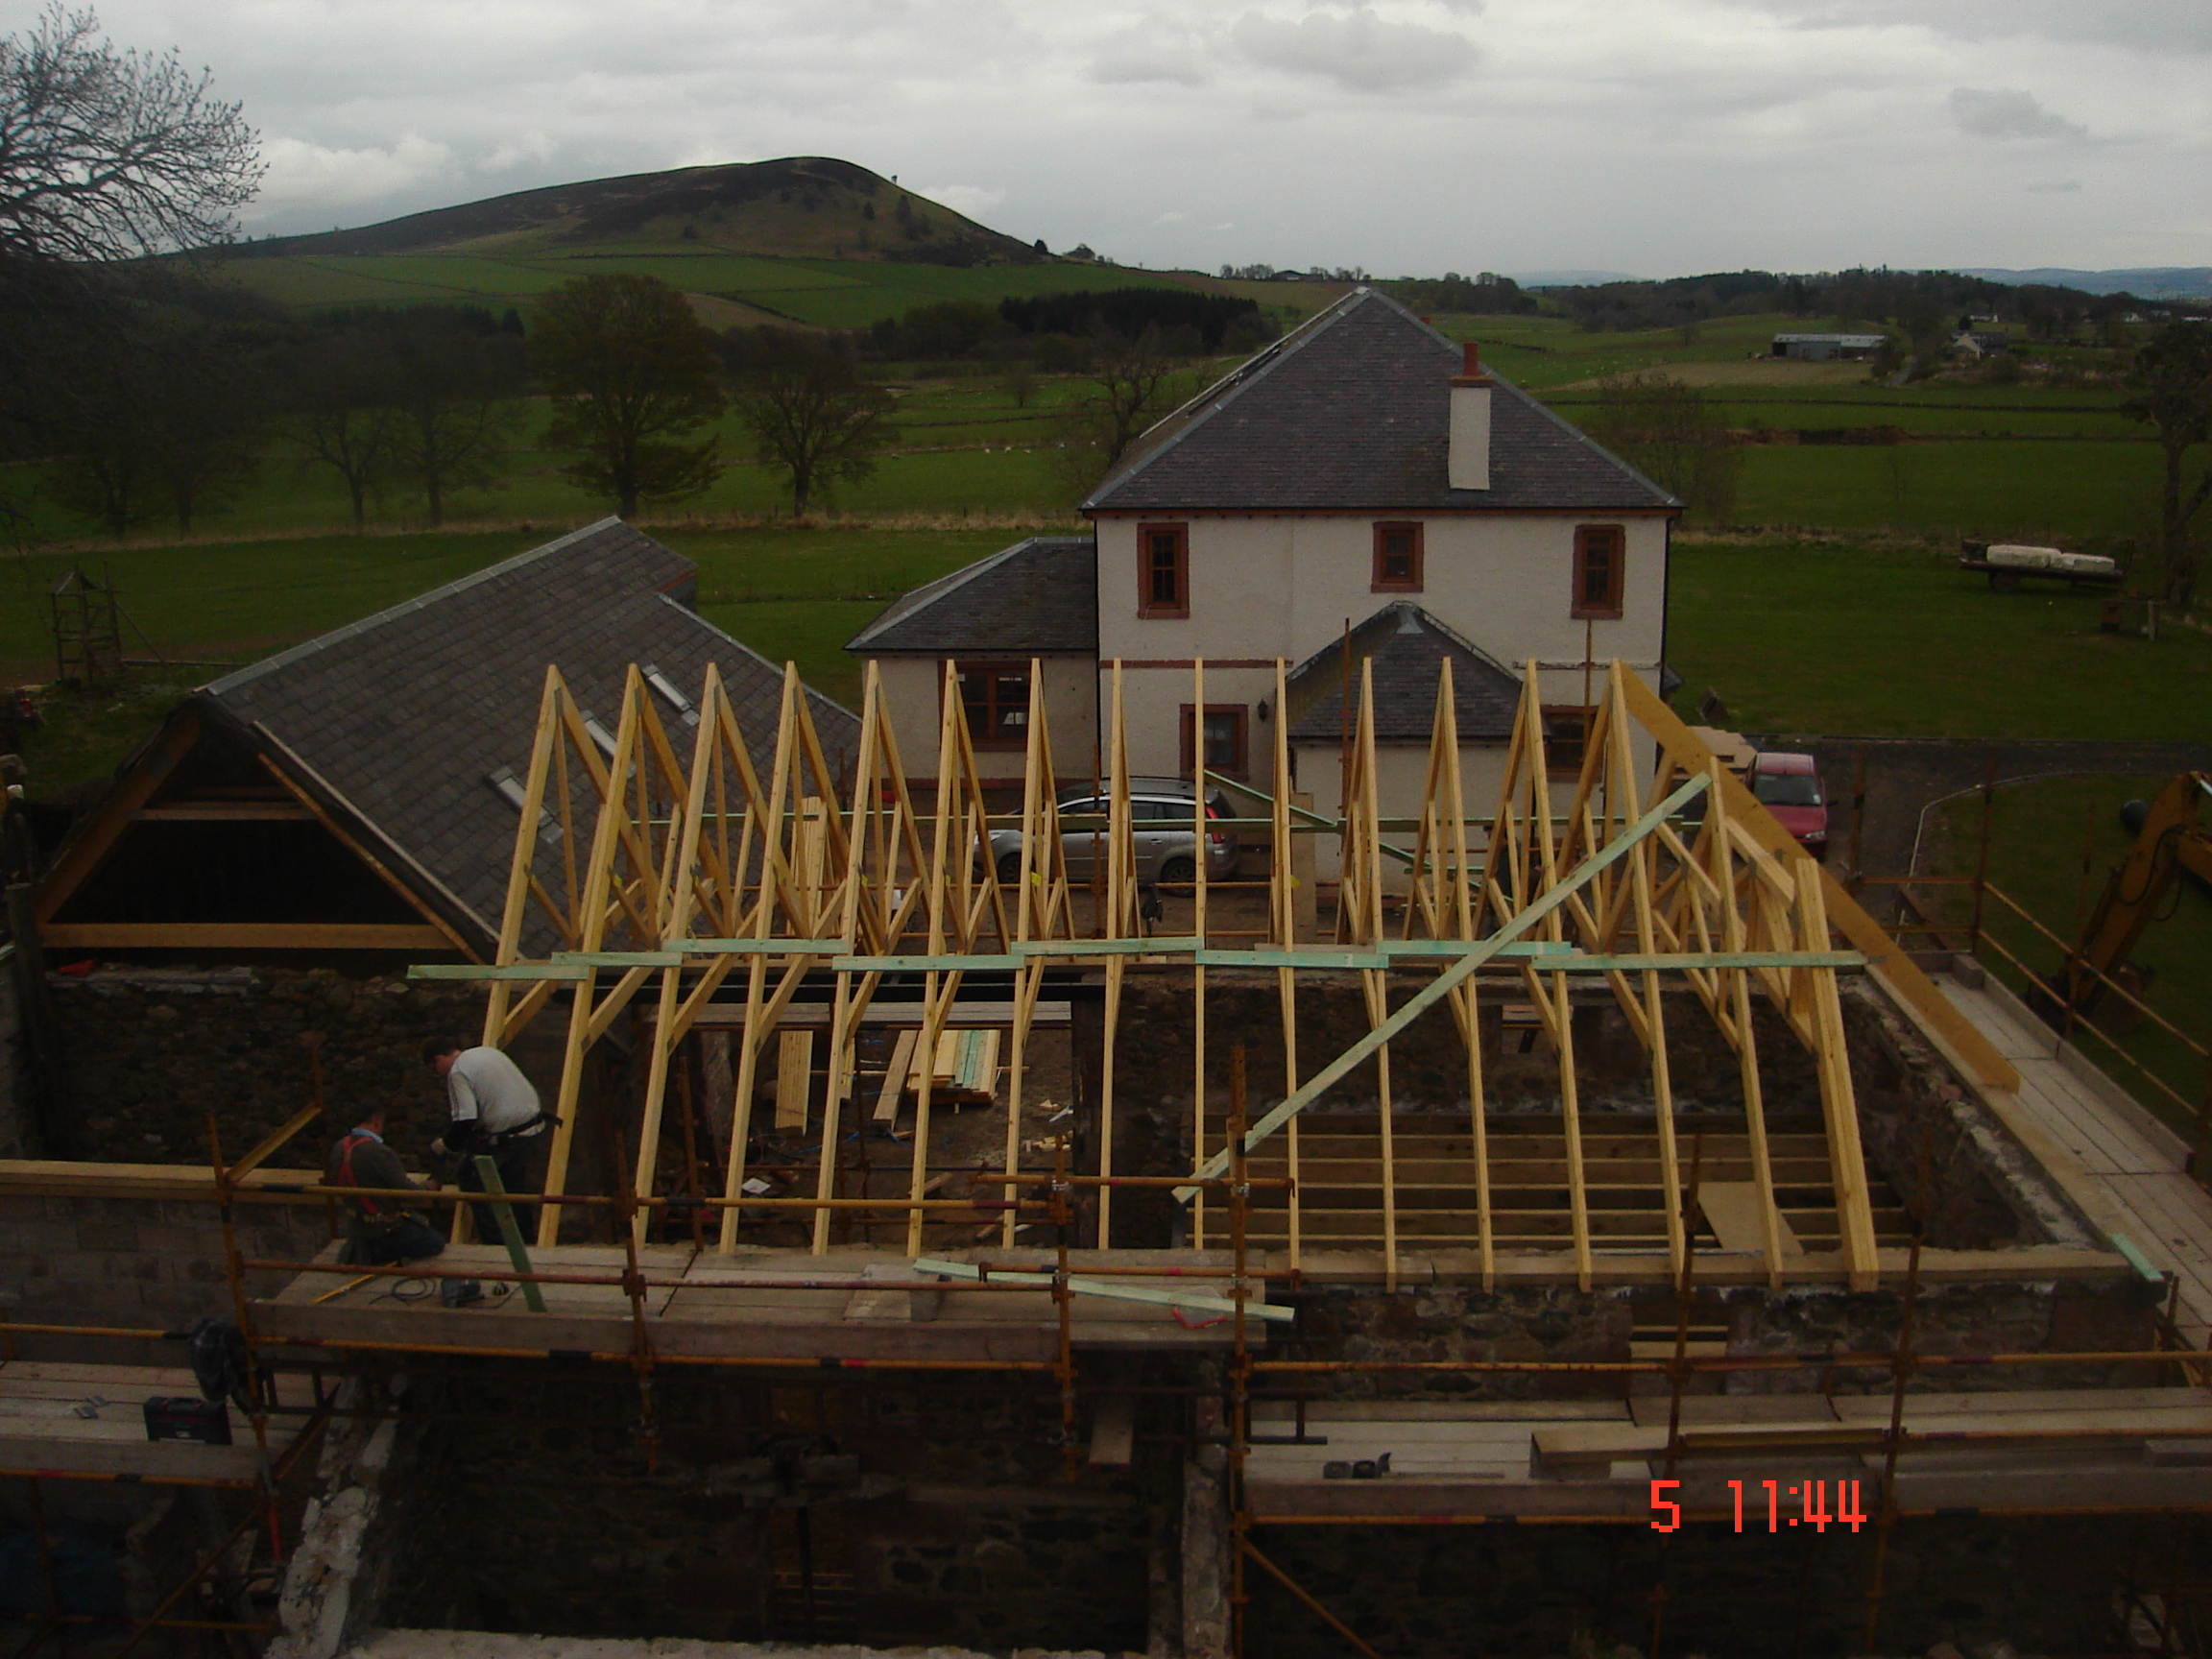 With the construction of the family home complete, rebuilding of the steading continues